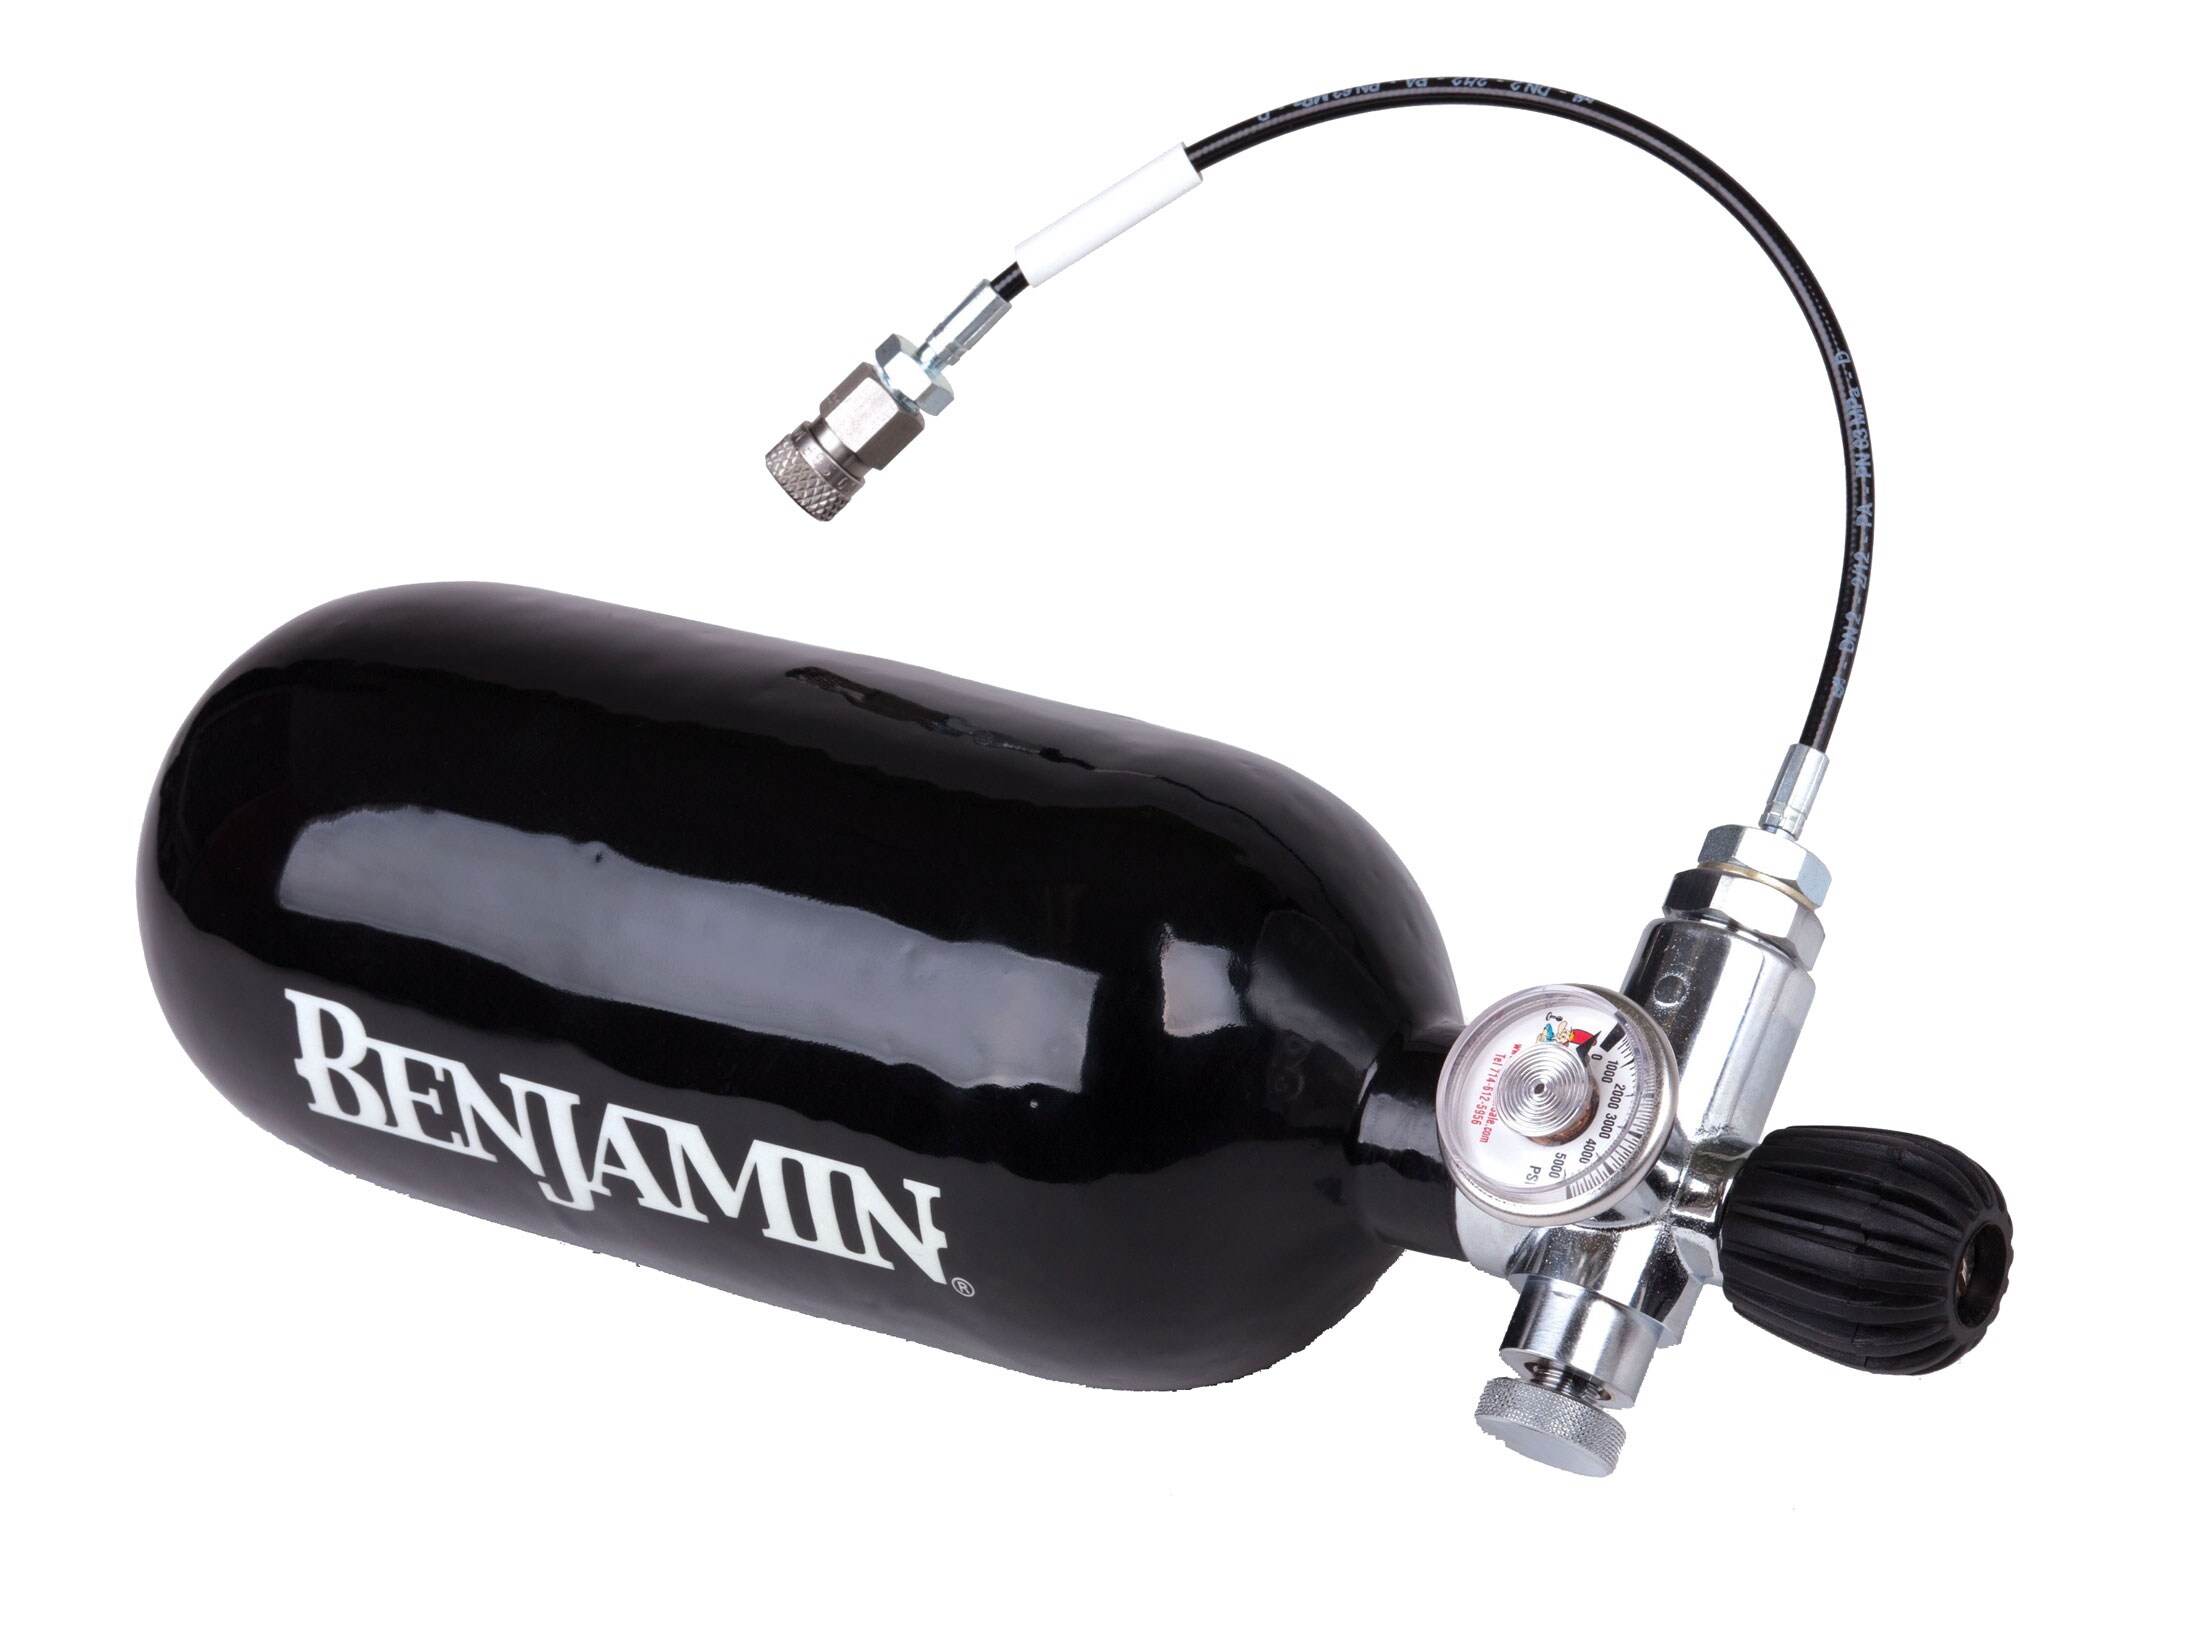 Benjamin PCP Charging System 90 Cubic Inch Carbon Fiber For Sale